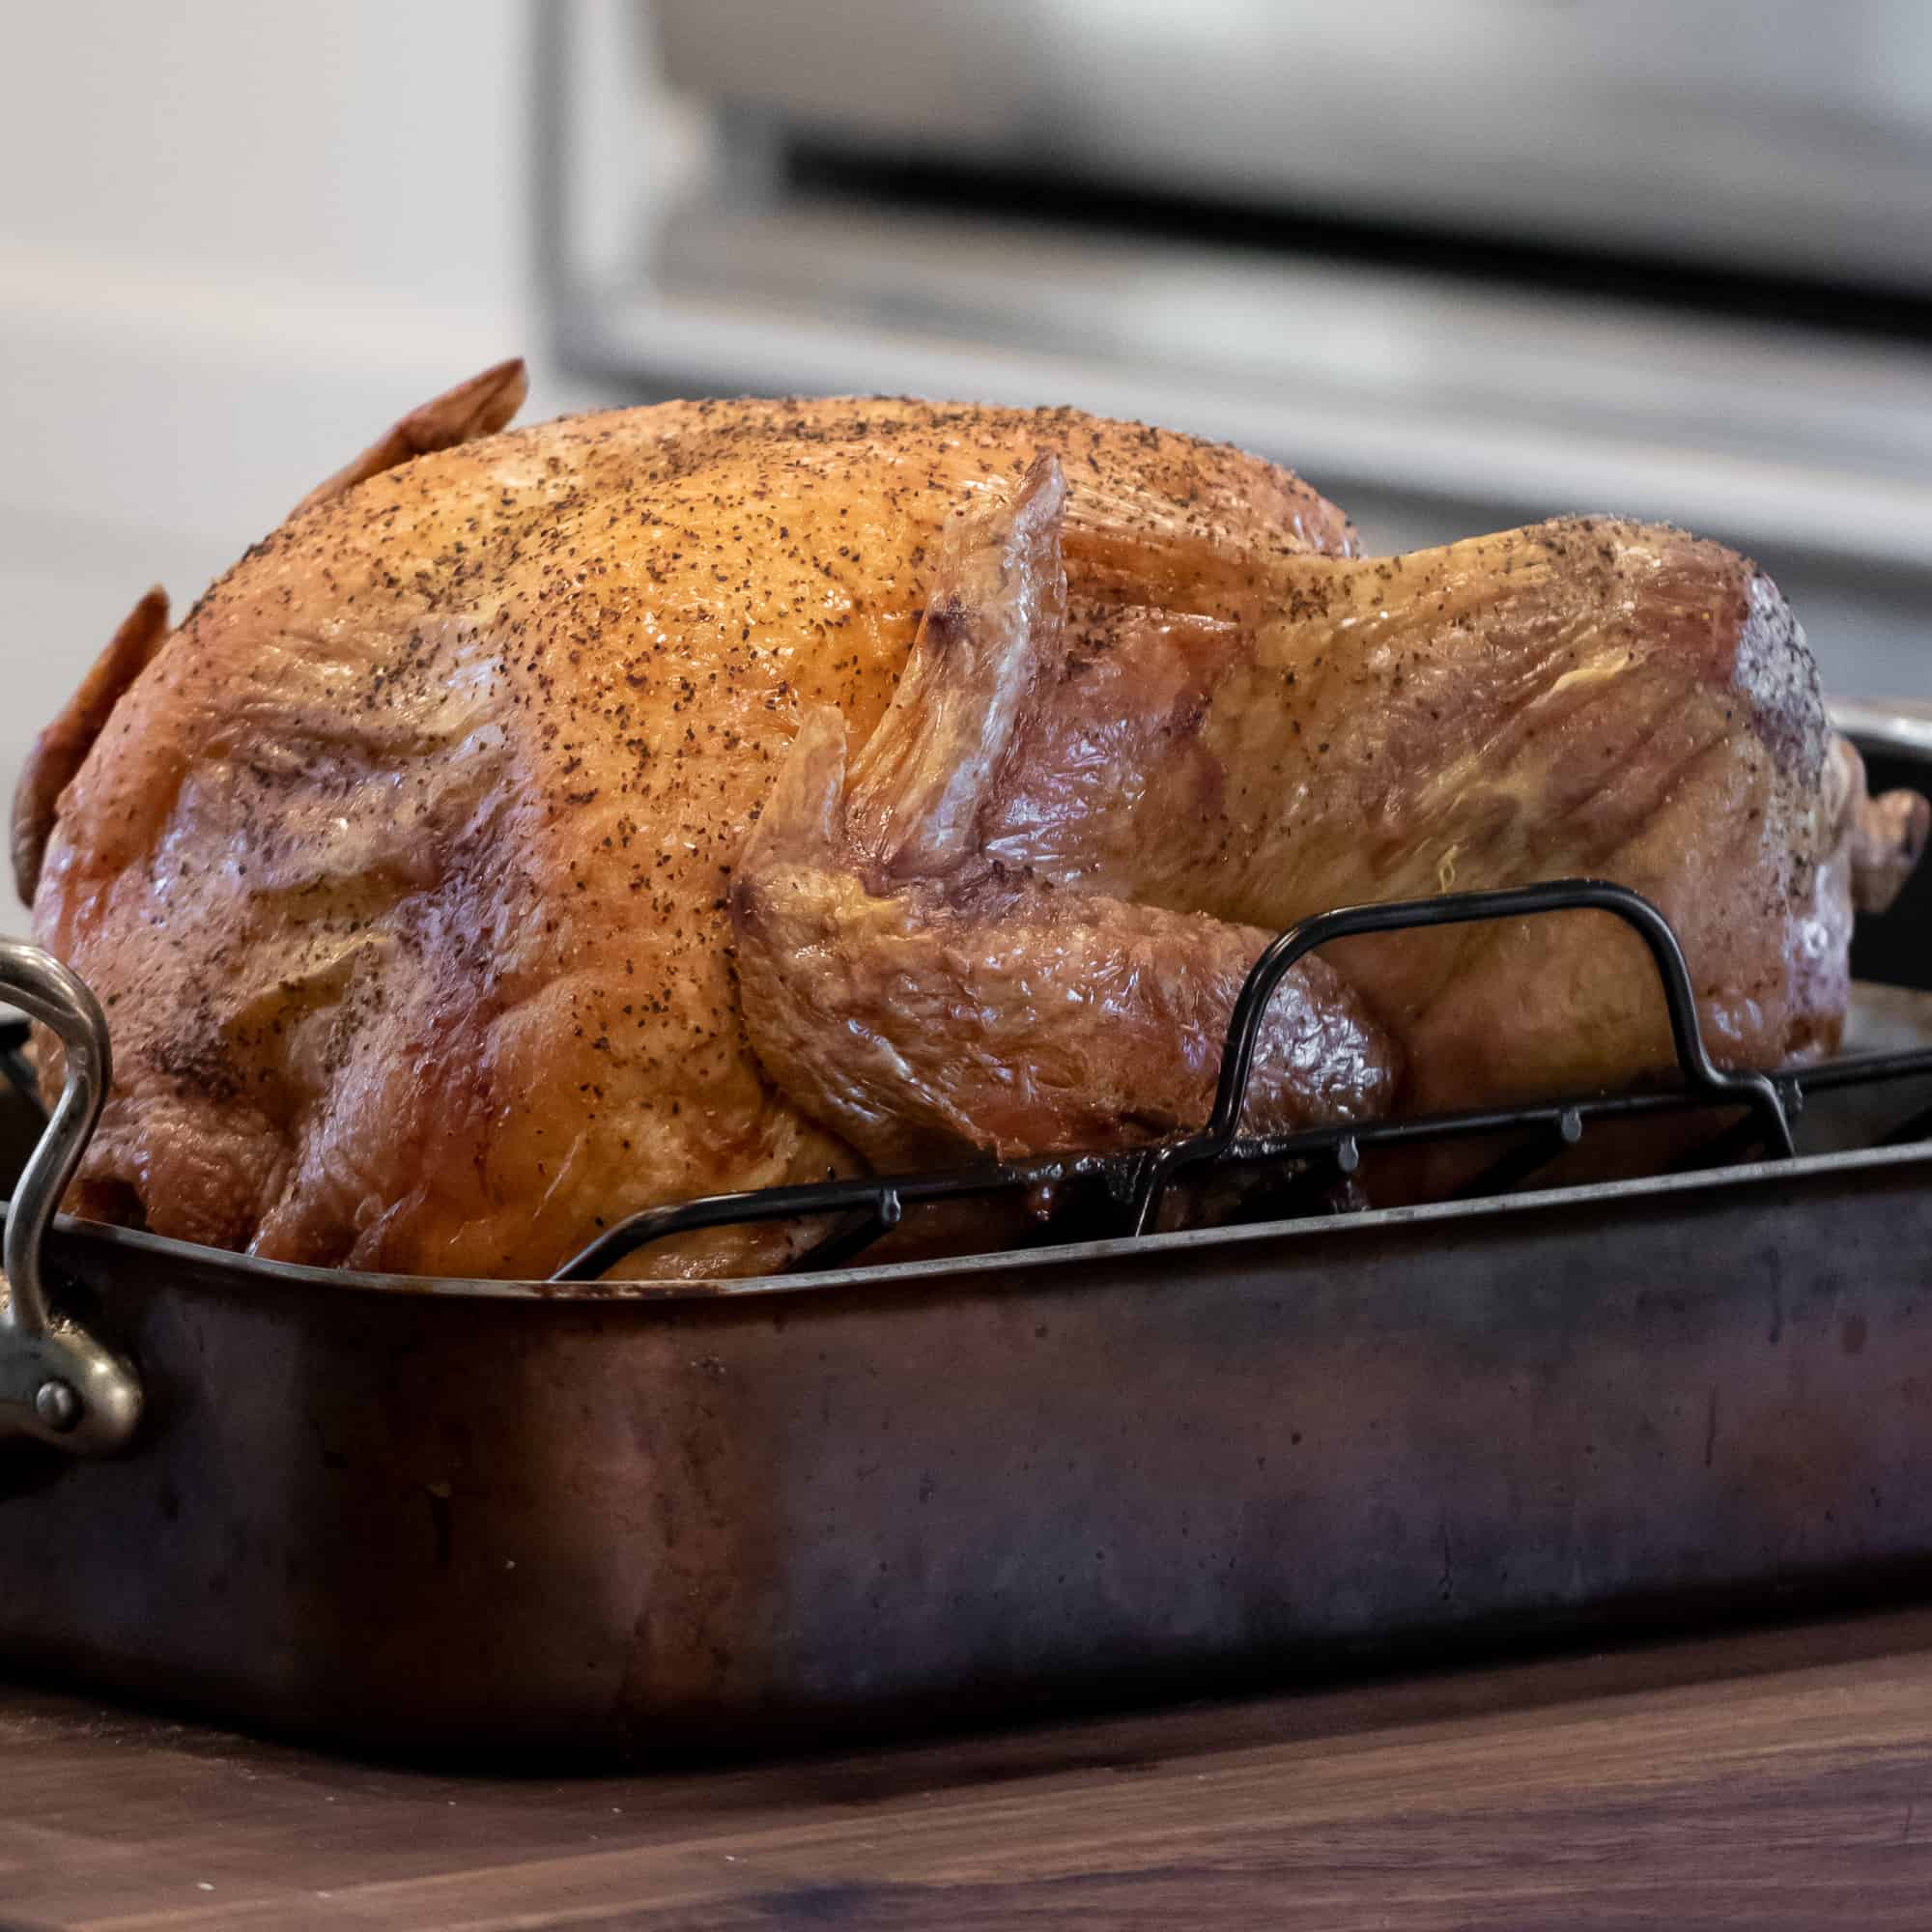 Instructions for how to cook an unstuffed turkey in an oven. Recipe and details for how long to roast a turkey.